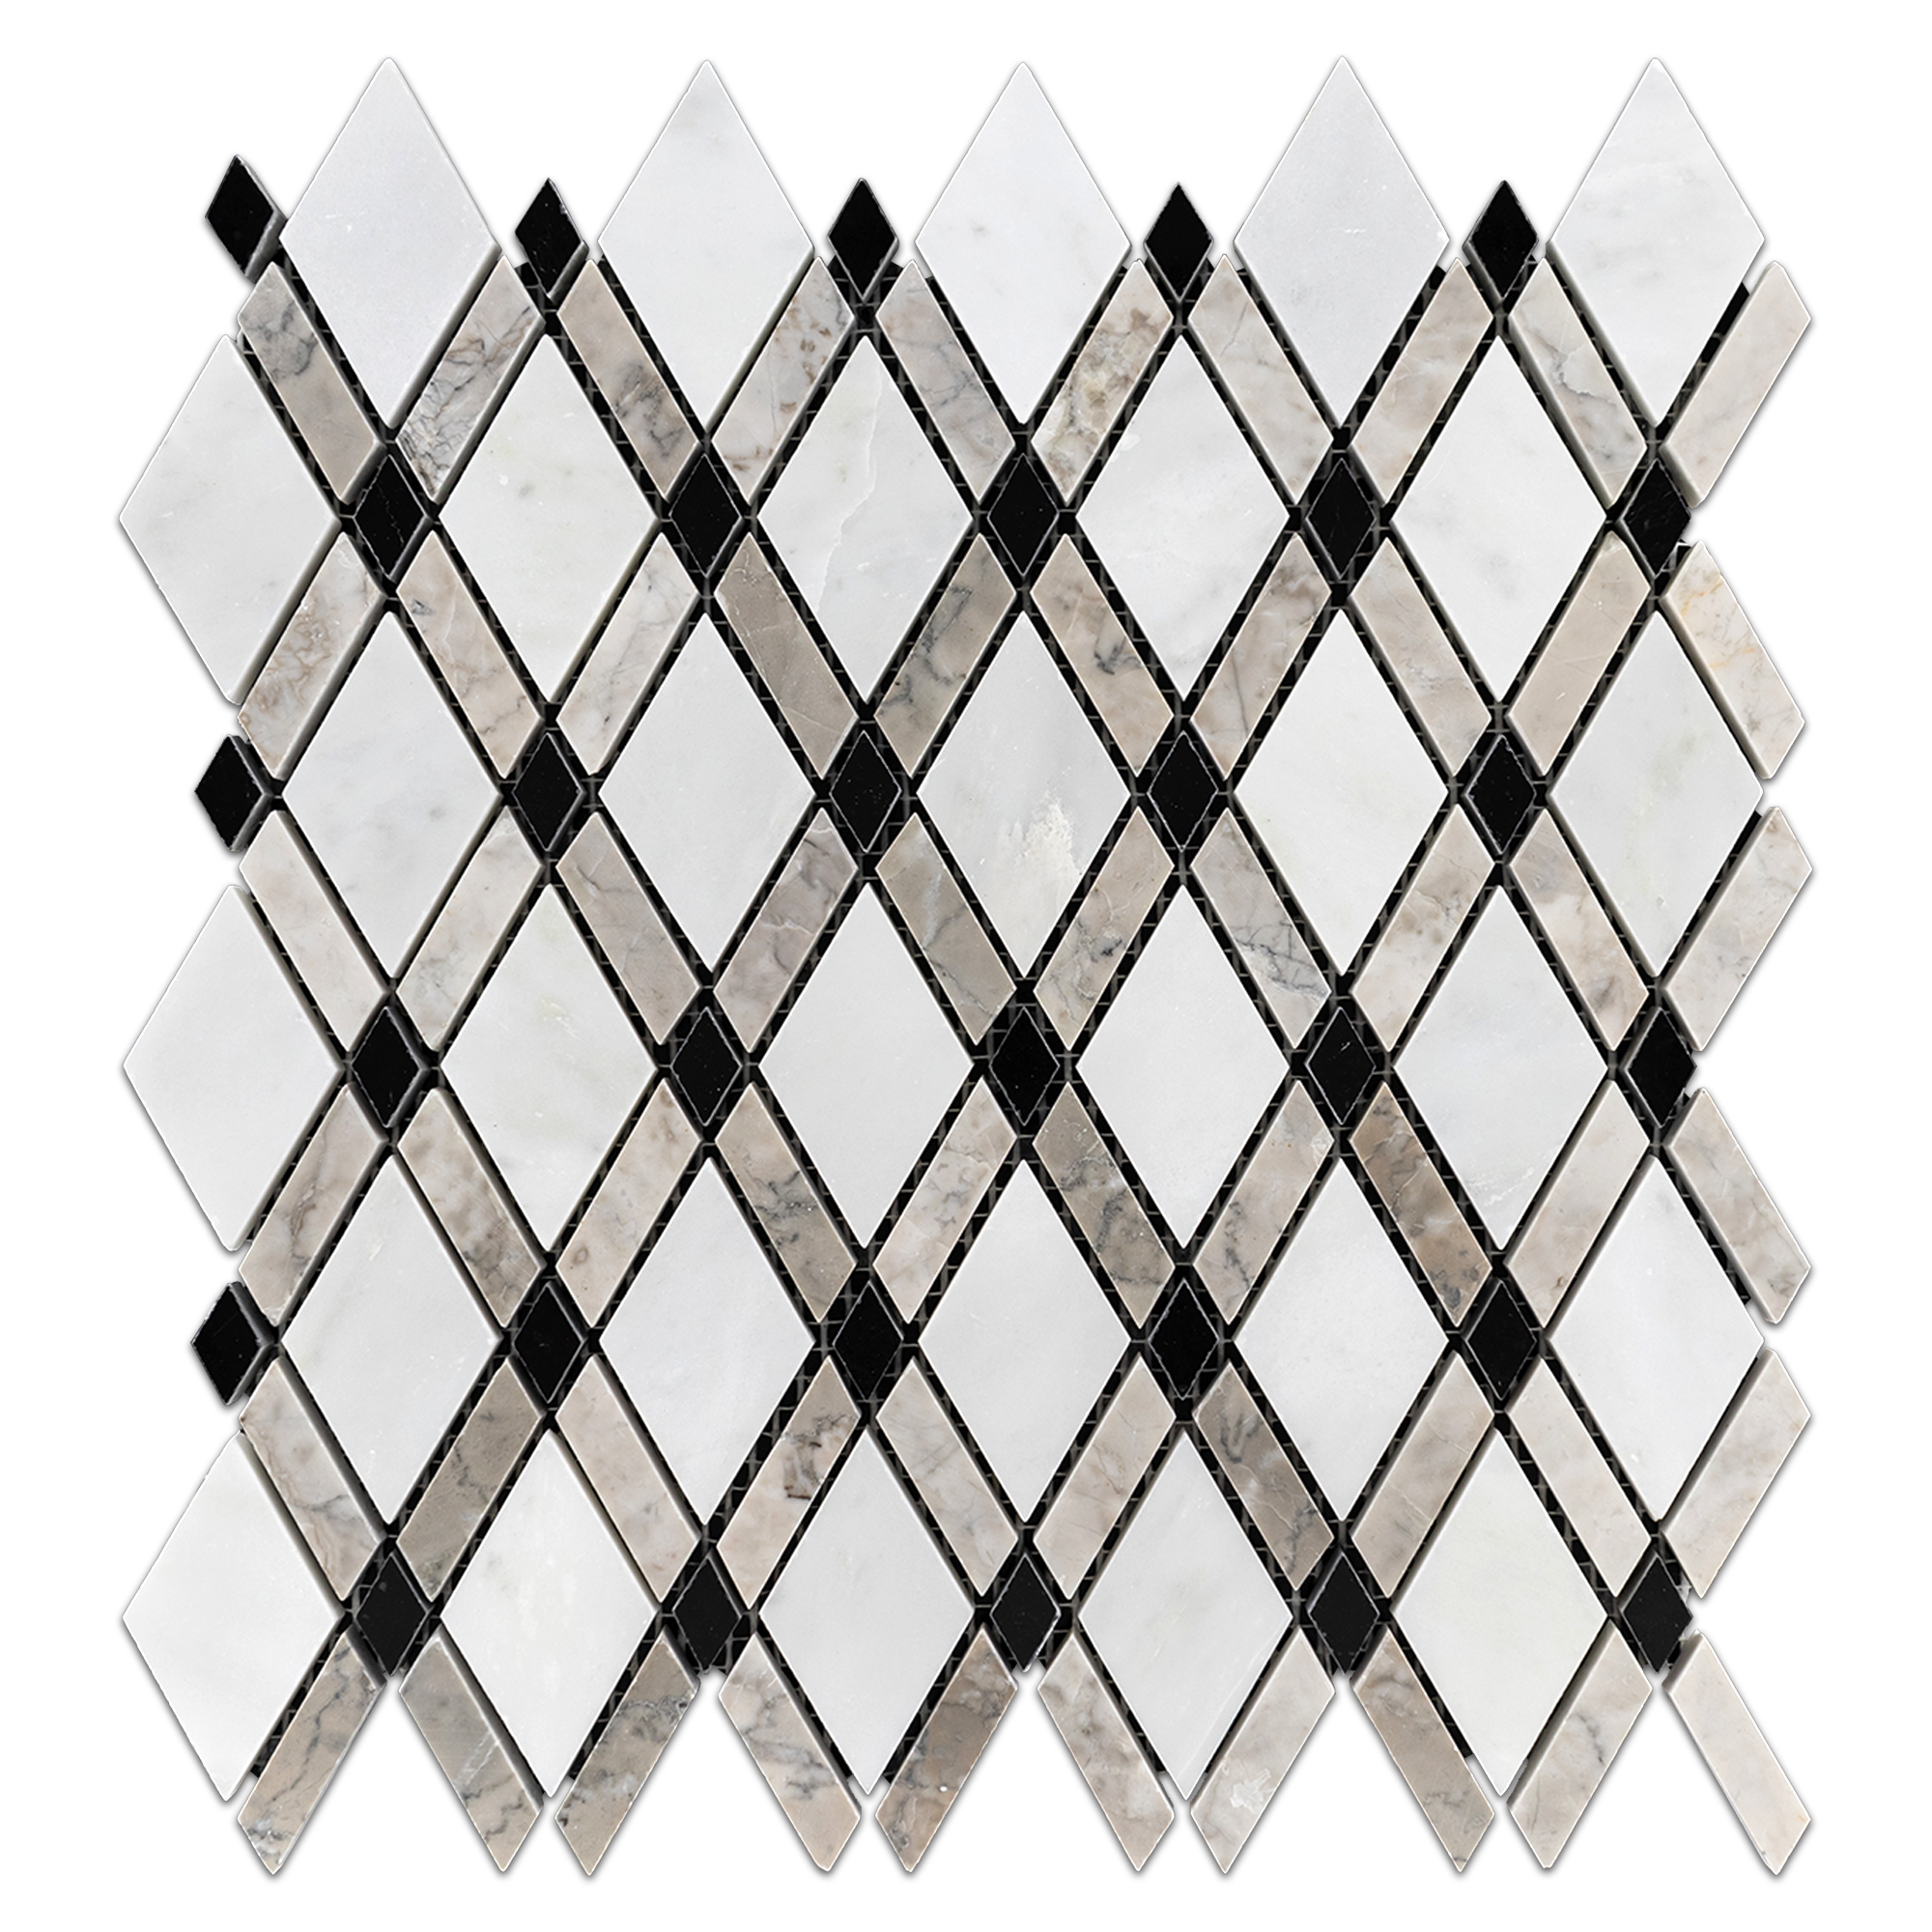 Elon Temple Grey Absolute White Black Marble Outlined Rhomboid Field Mosaic 10.4375x10.75x0.375 Polished - Surface Group International Product